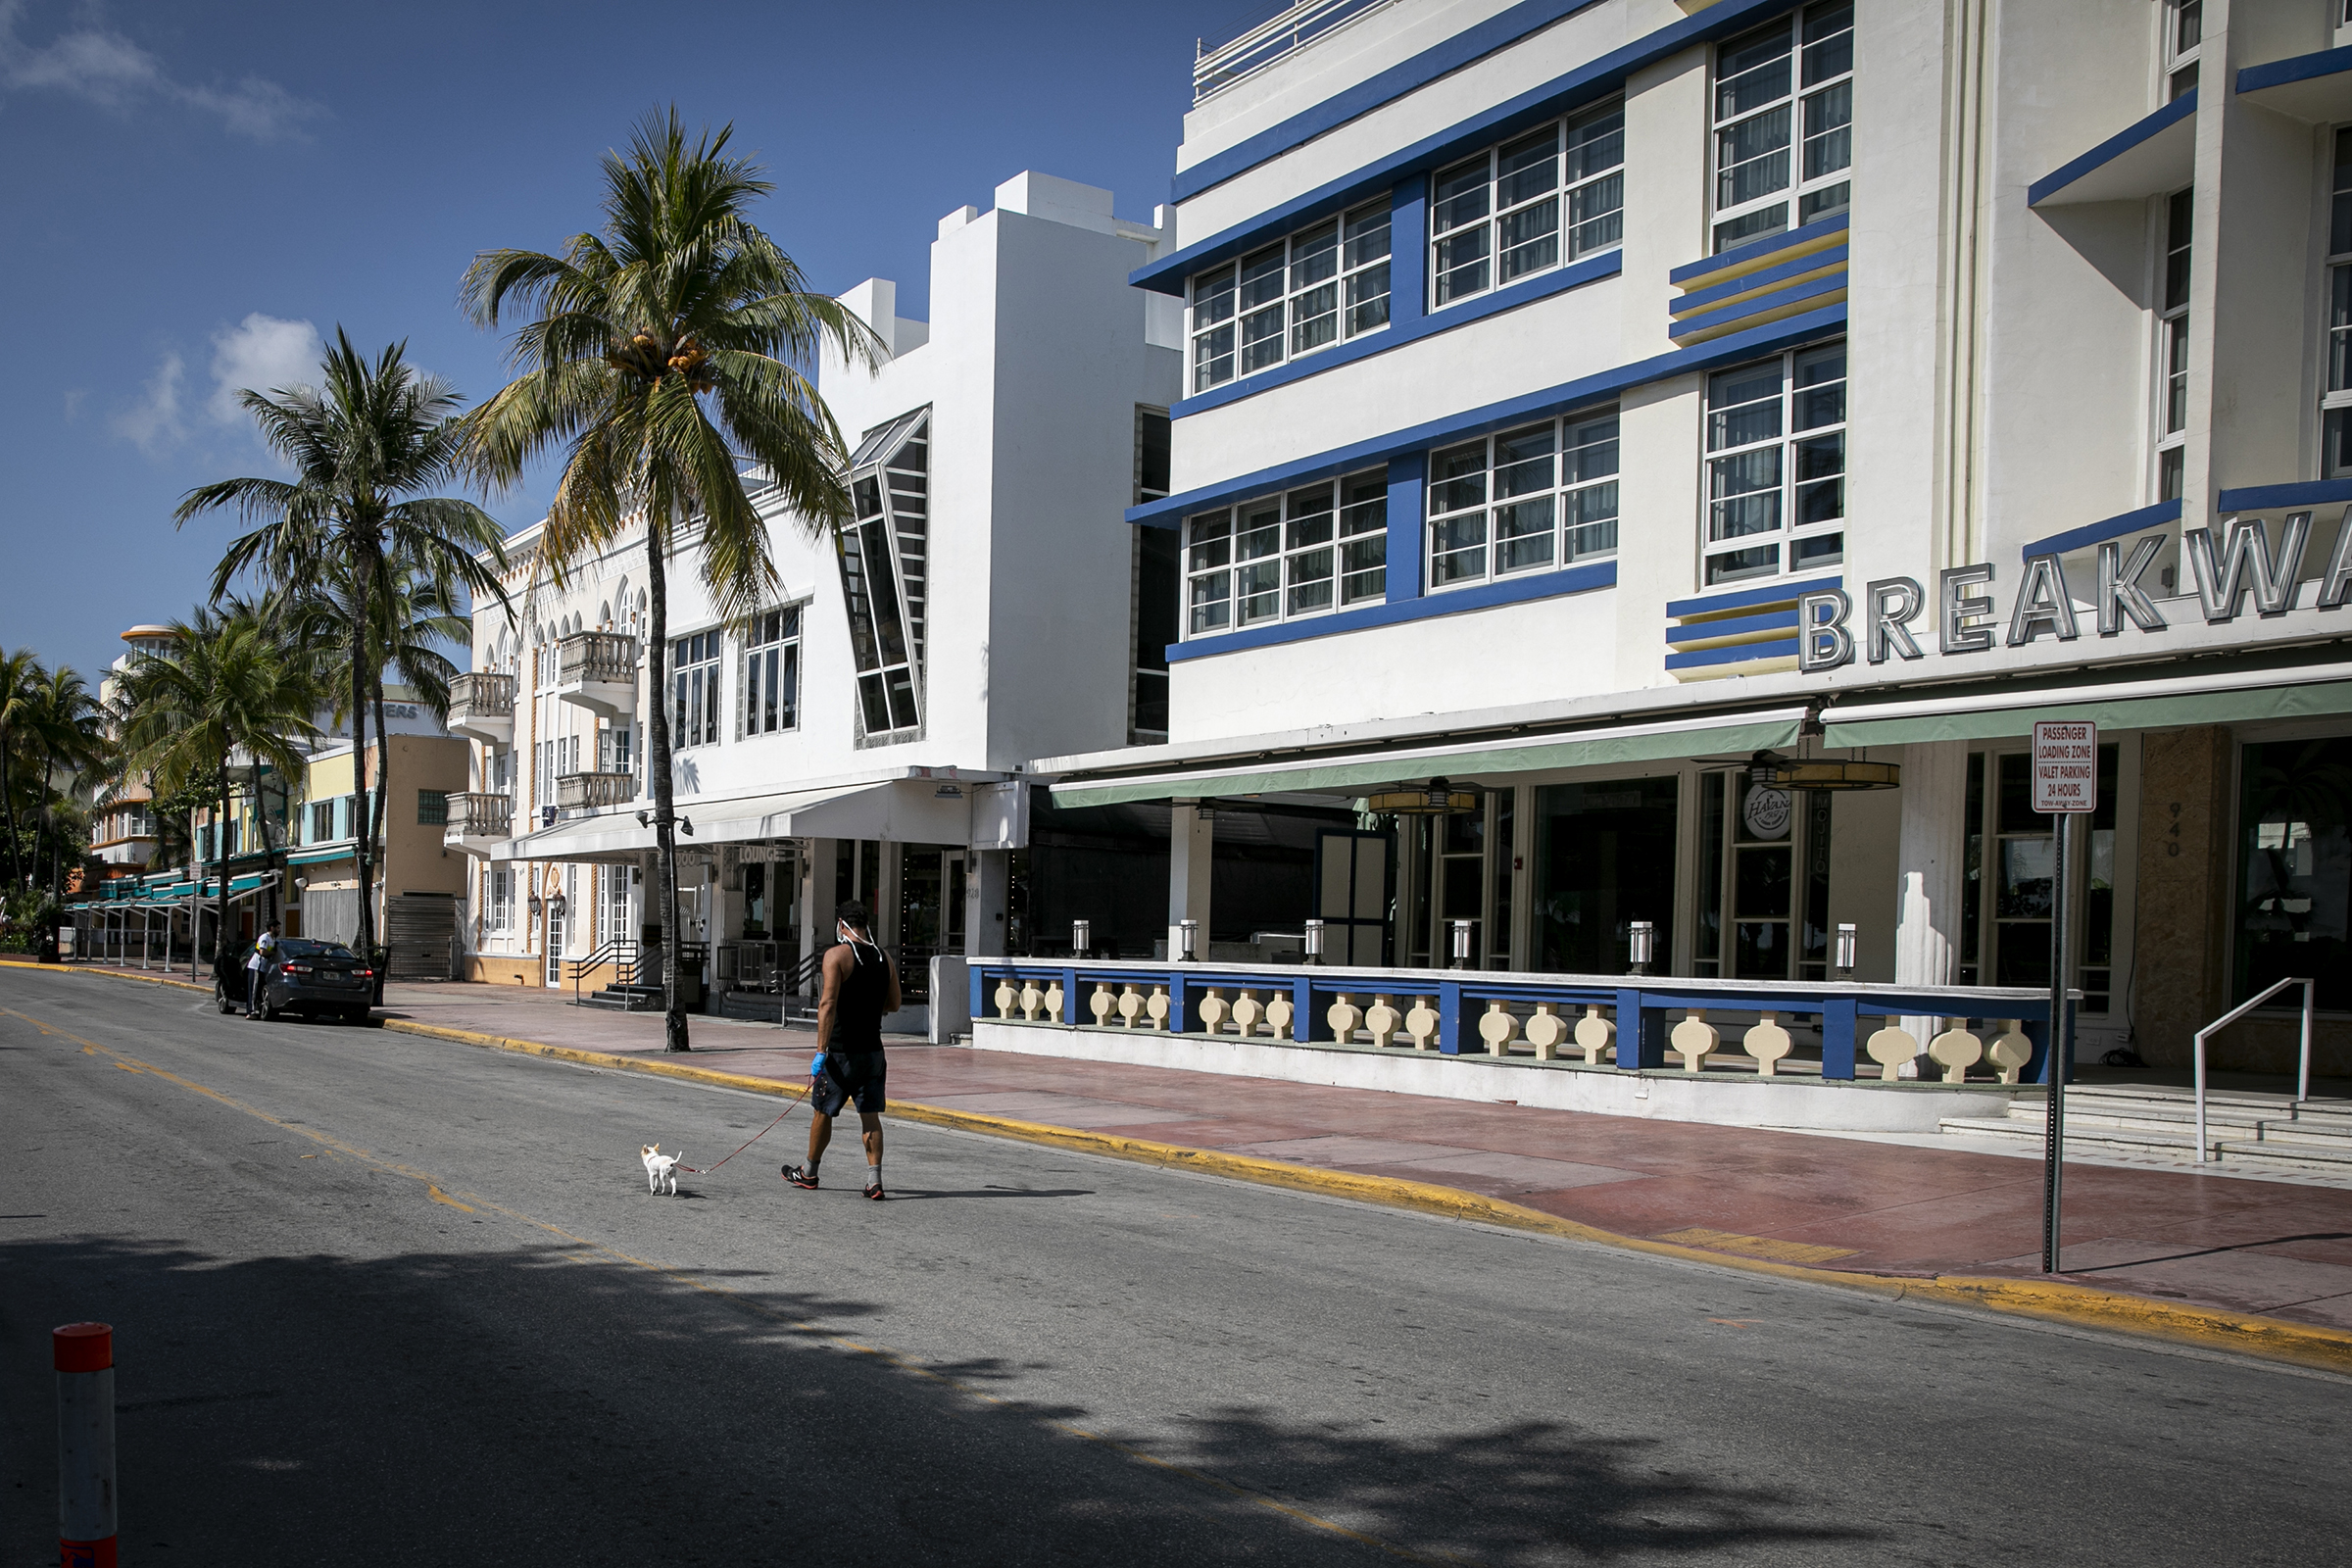 A pedestrian walks a dog in the middle of an empty street in Miami, Florida, on April 8, 2020. (Marco Bello—Bloomberg via Getty Images)